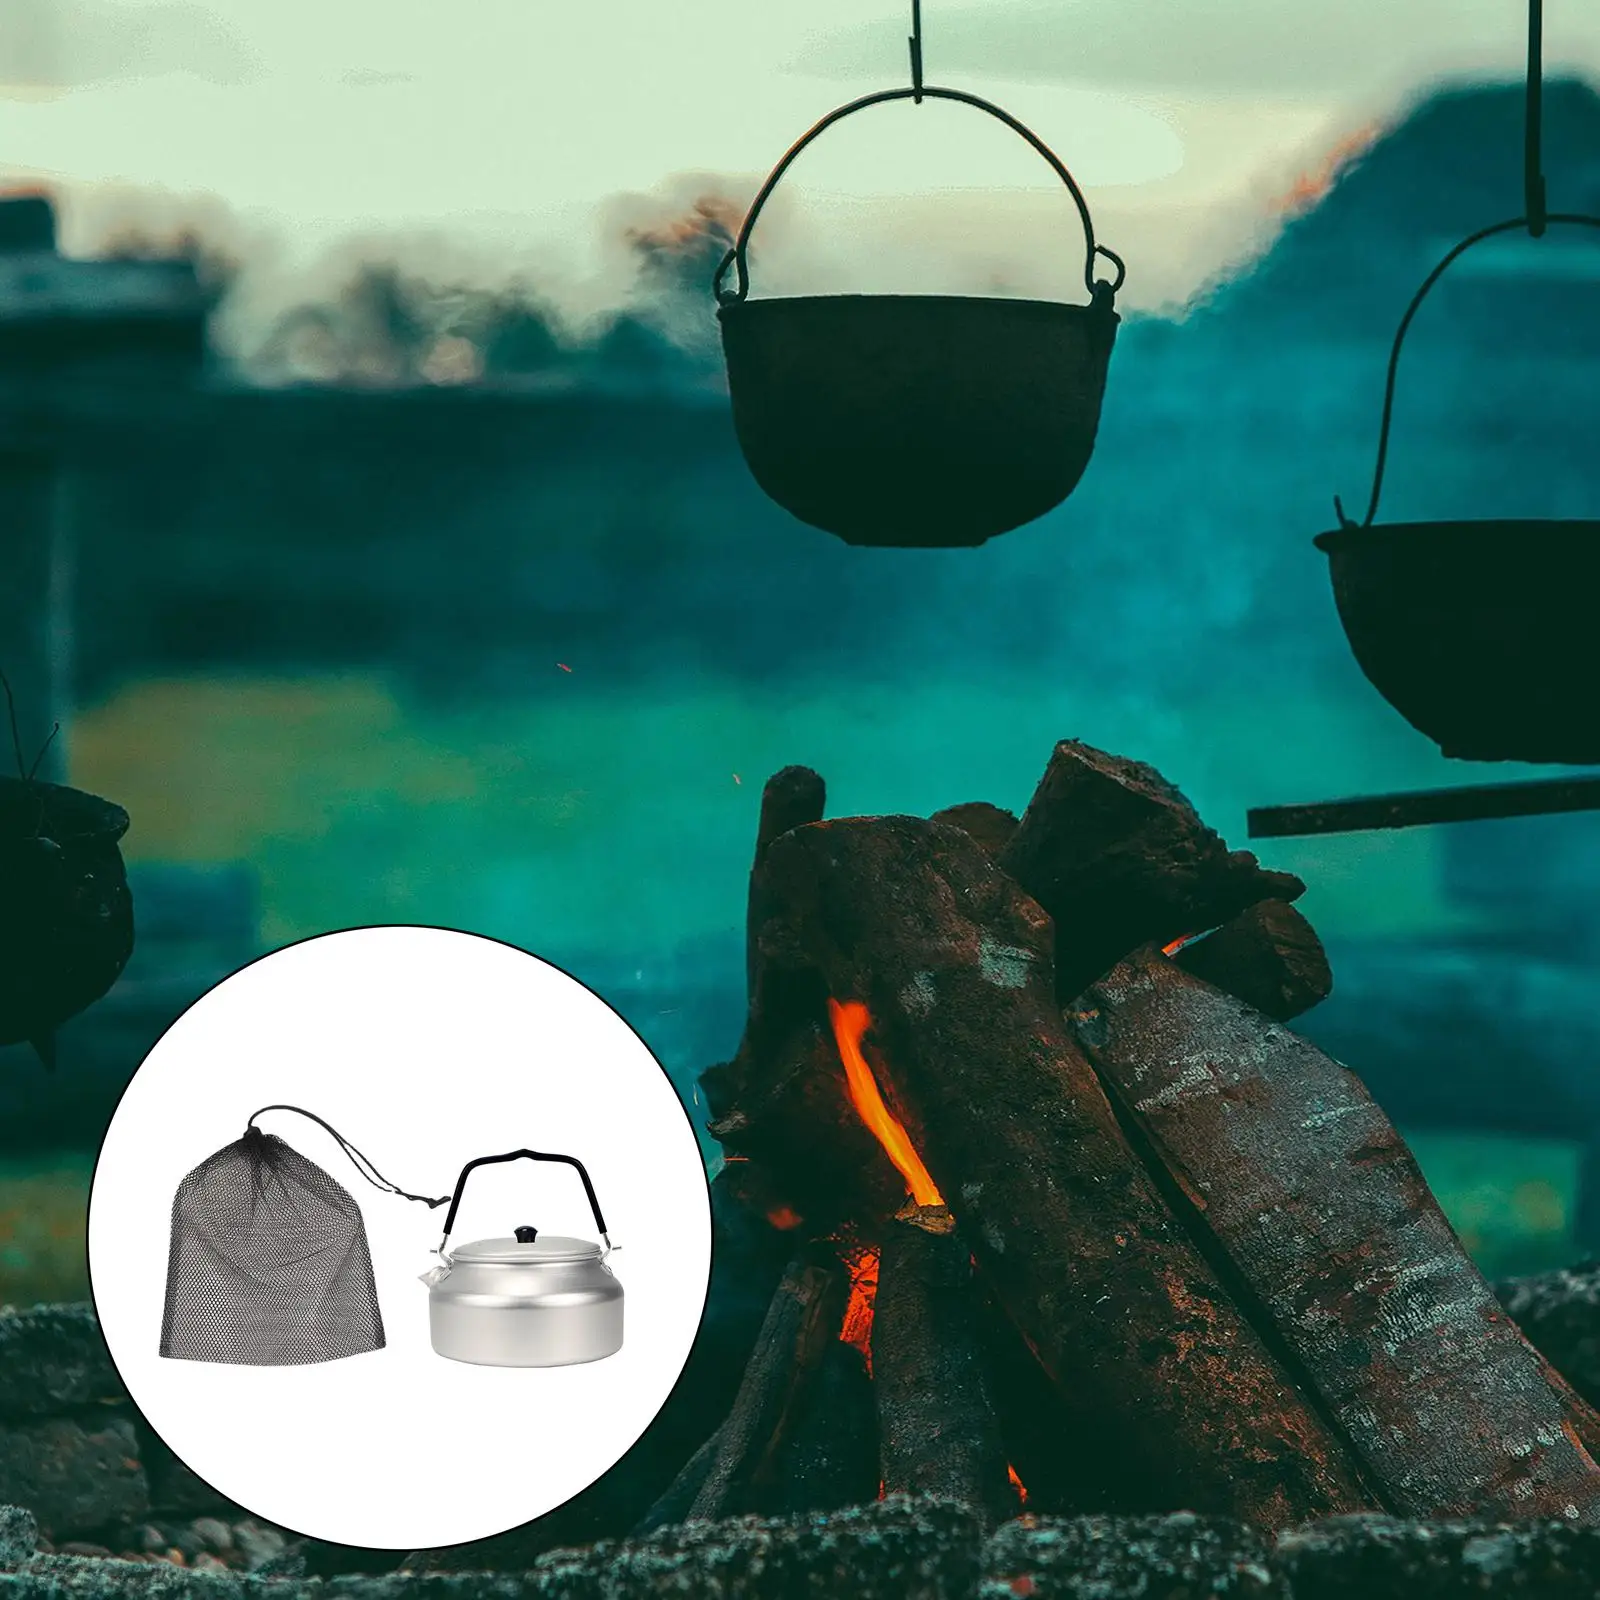 Camping Water Kettle Outdoor Portable Teapot Coffee Pot Cookware for Hiking Camping Travel Picnic for Boiling Water